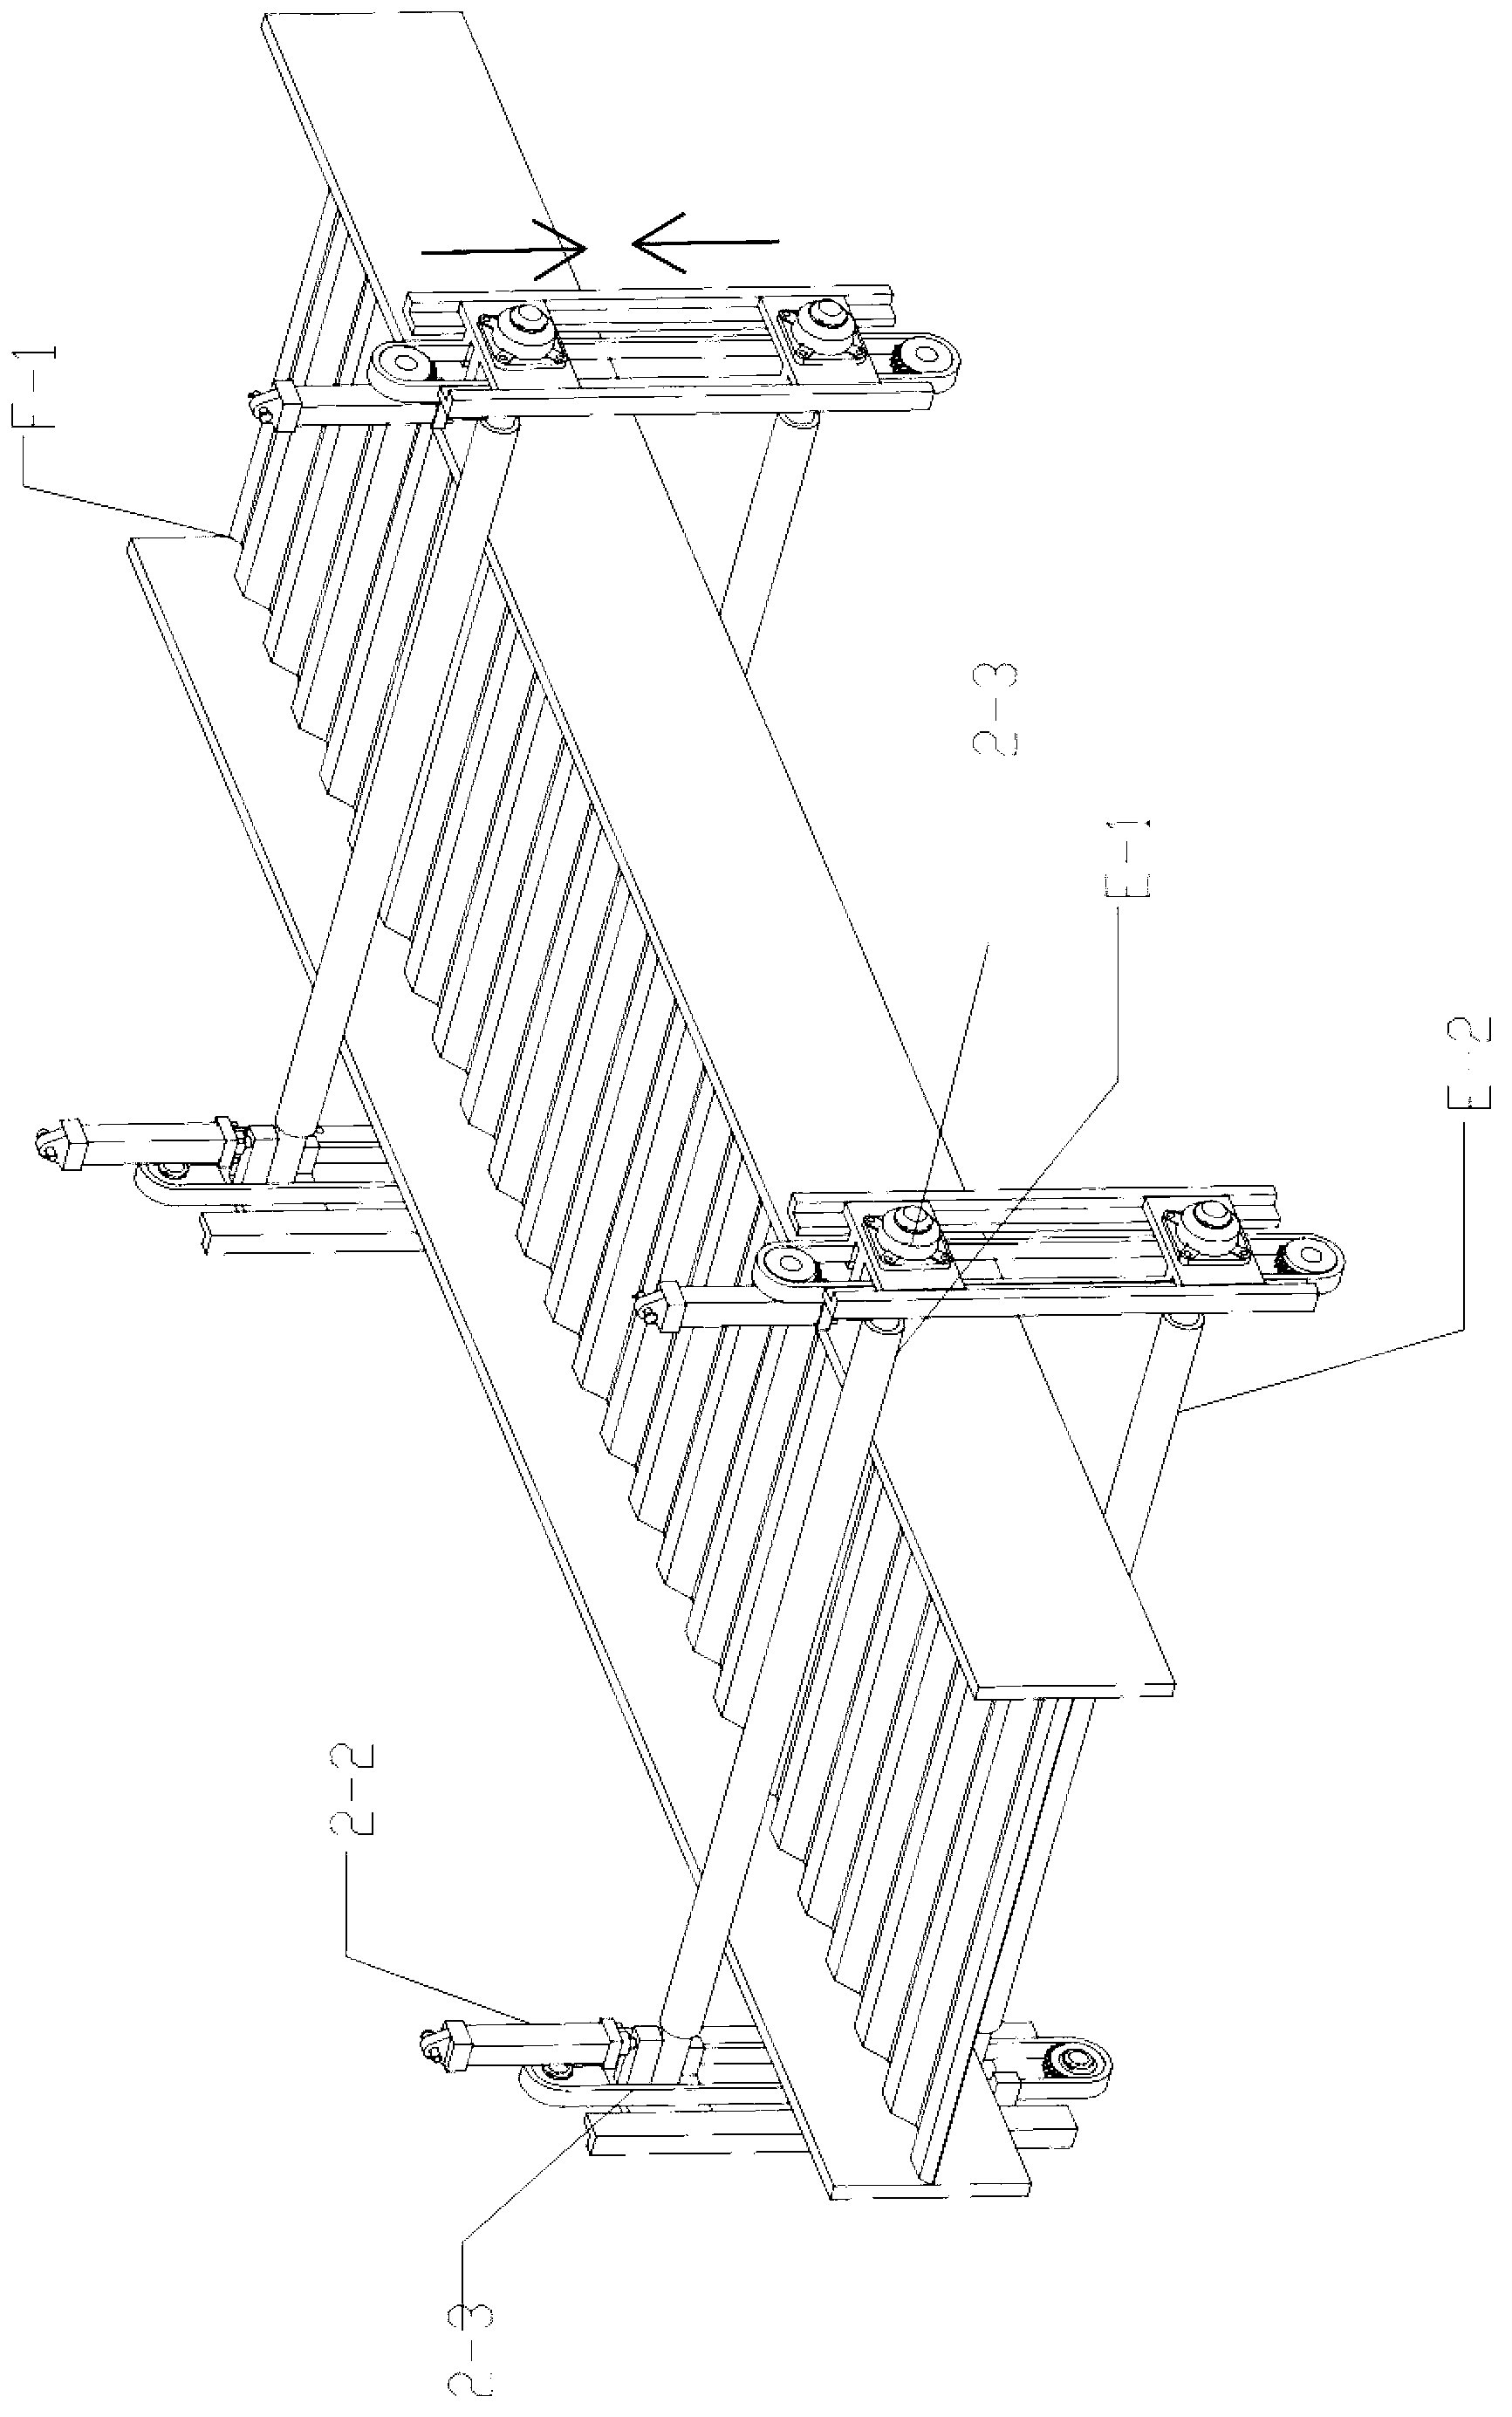 On-line automatic assembly device for H-shaped steel with corrugated web